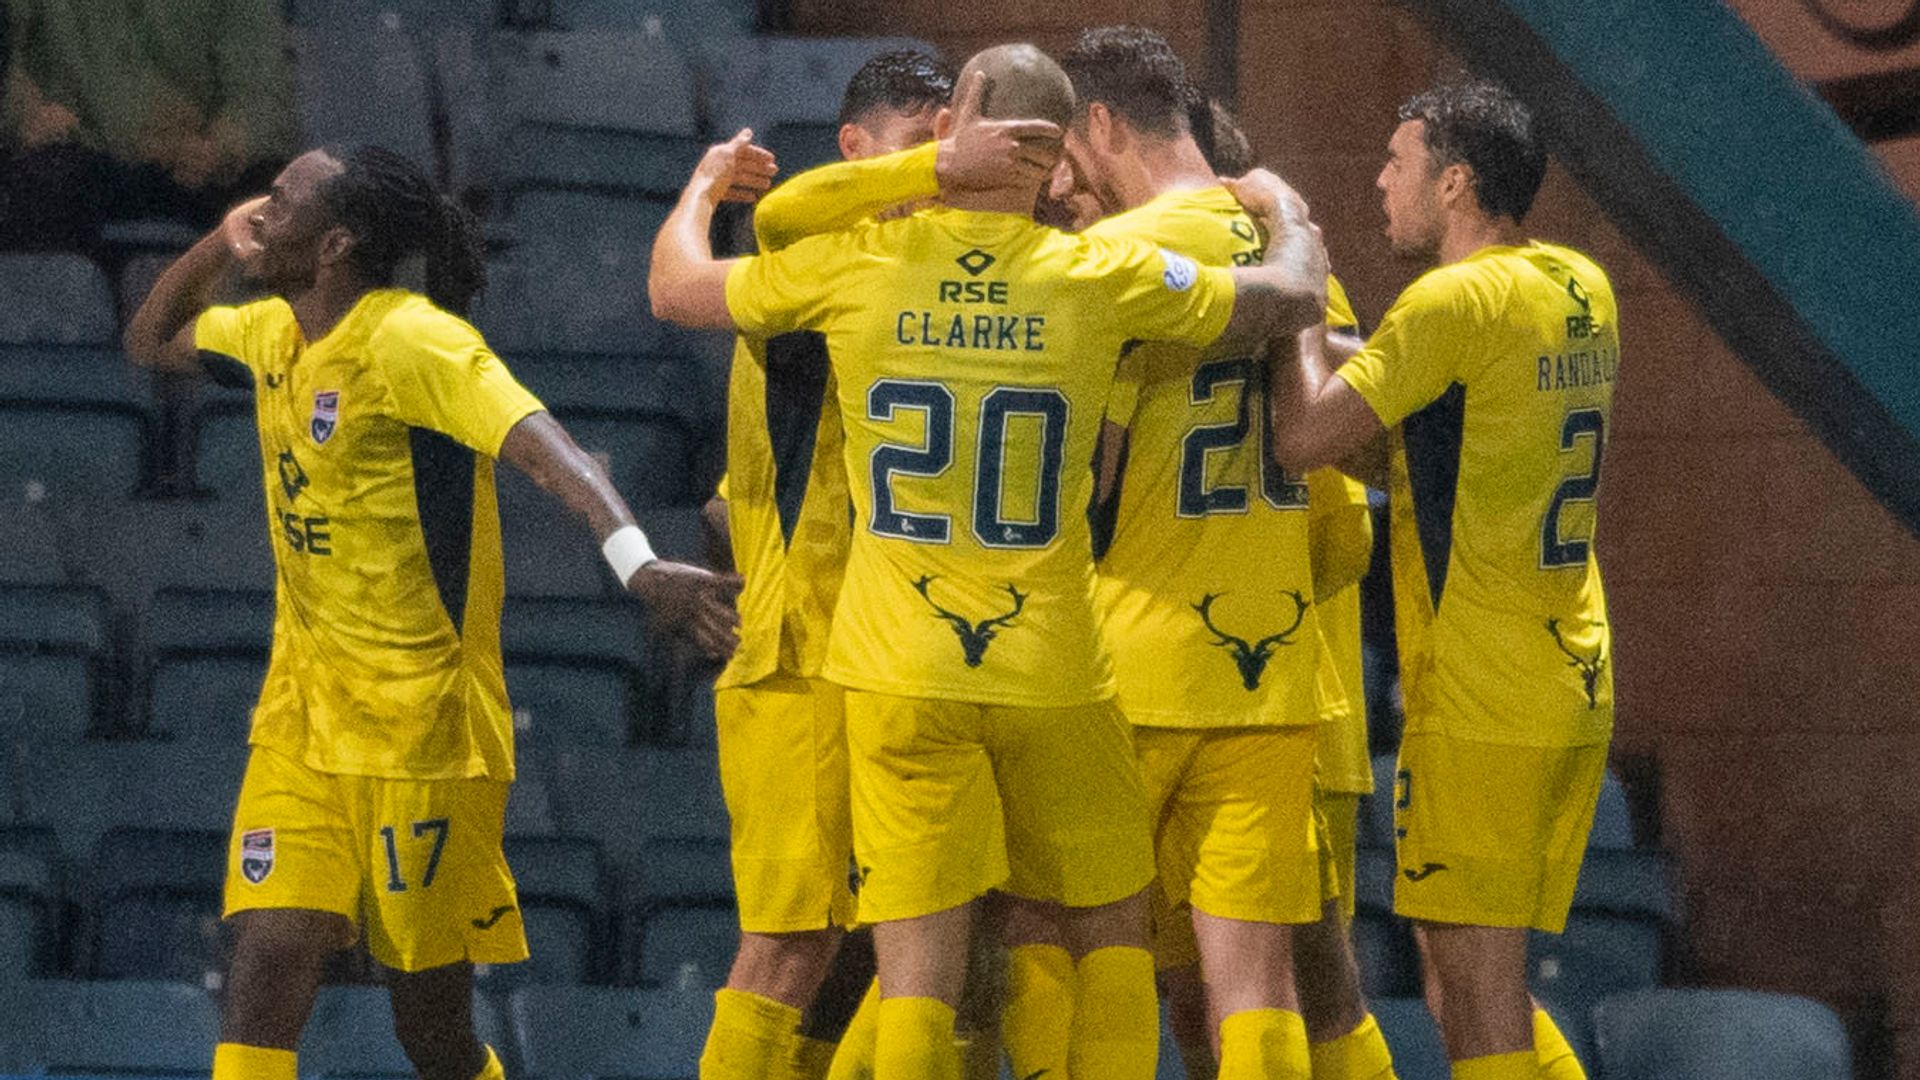 Ross County thrash Dundee to secure first league win